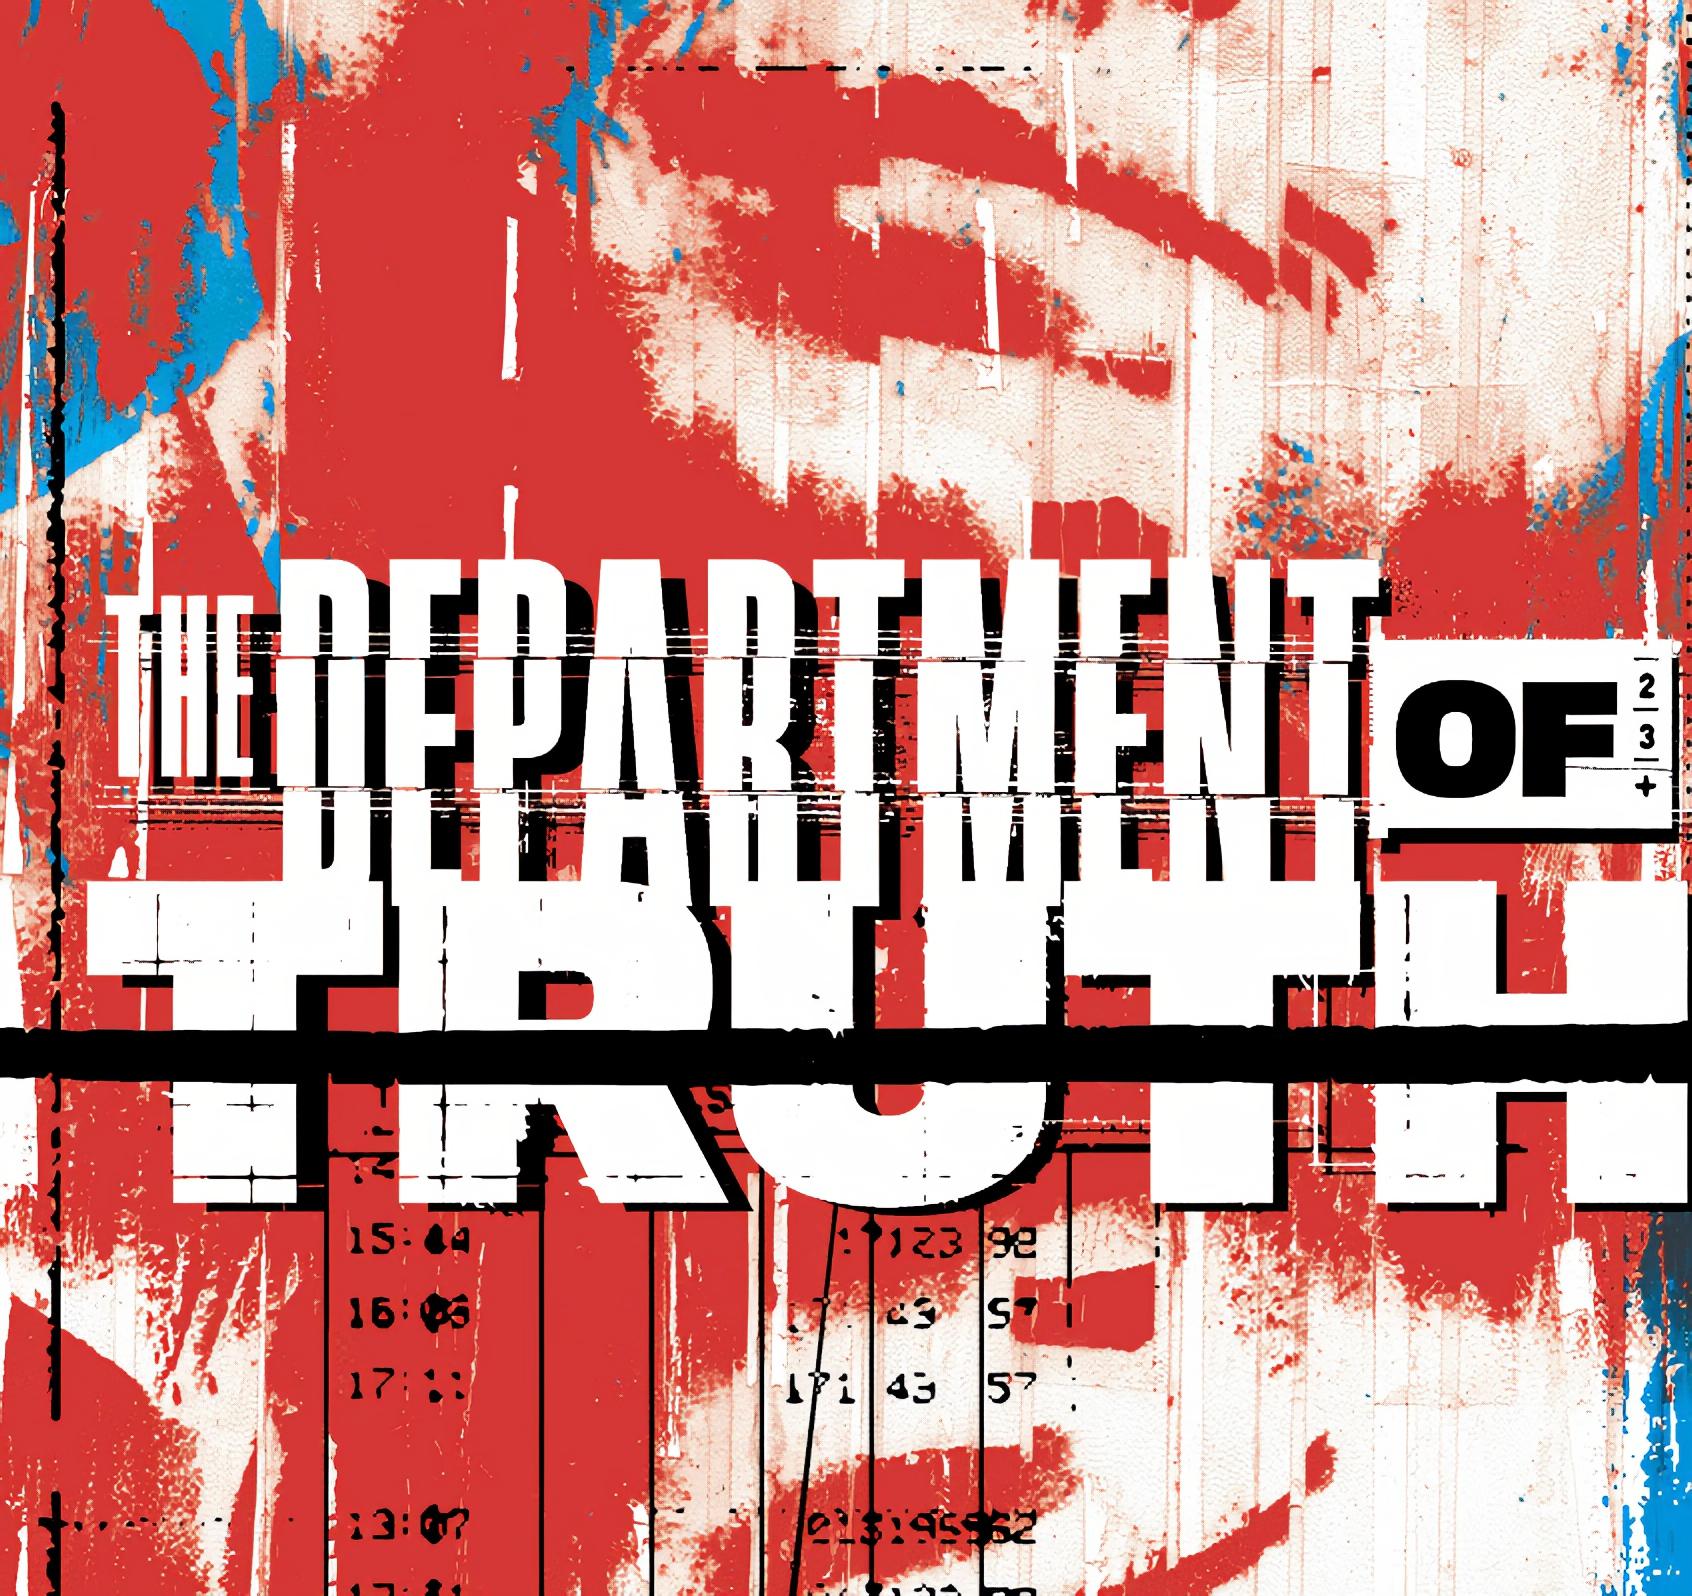 'The Department of Truth' #1 reaches 100k orders selling out at Diamond